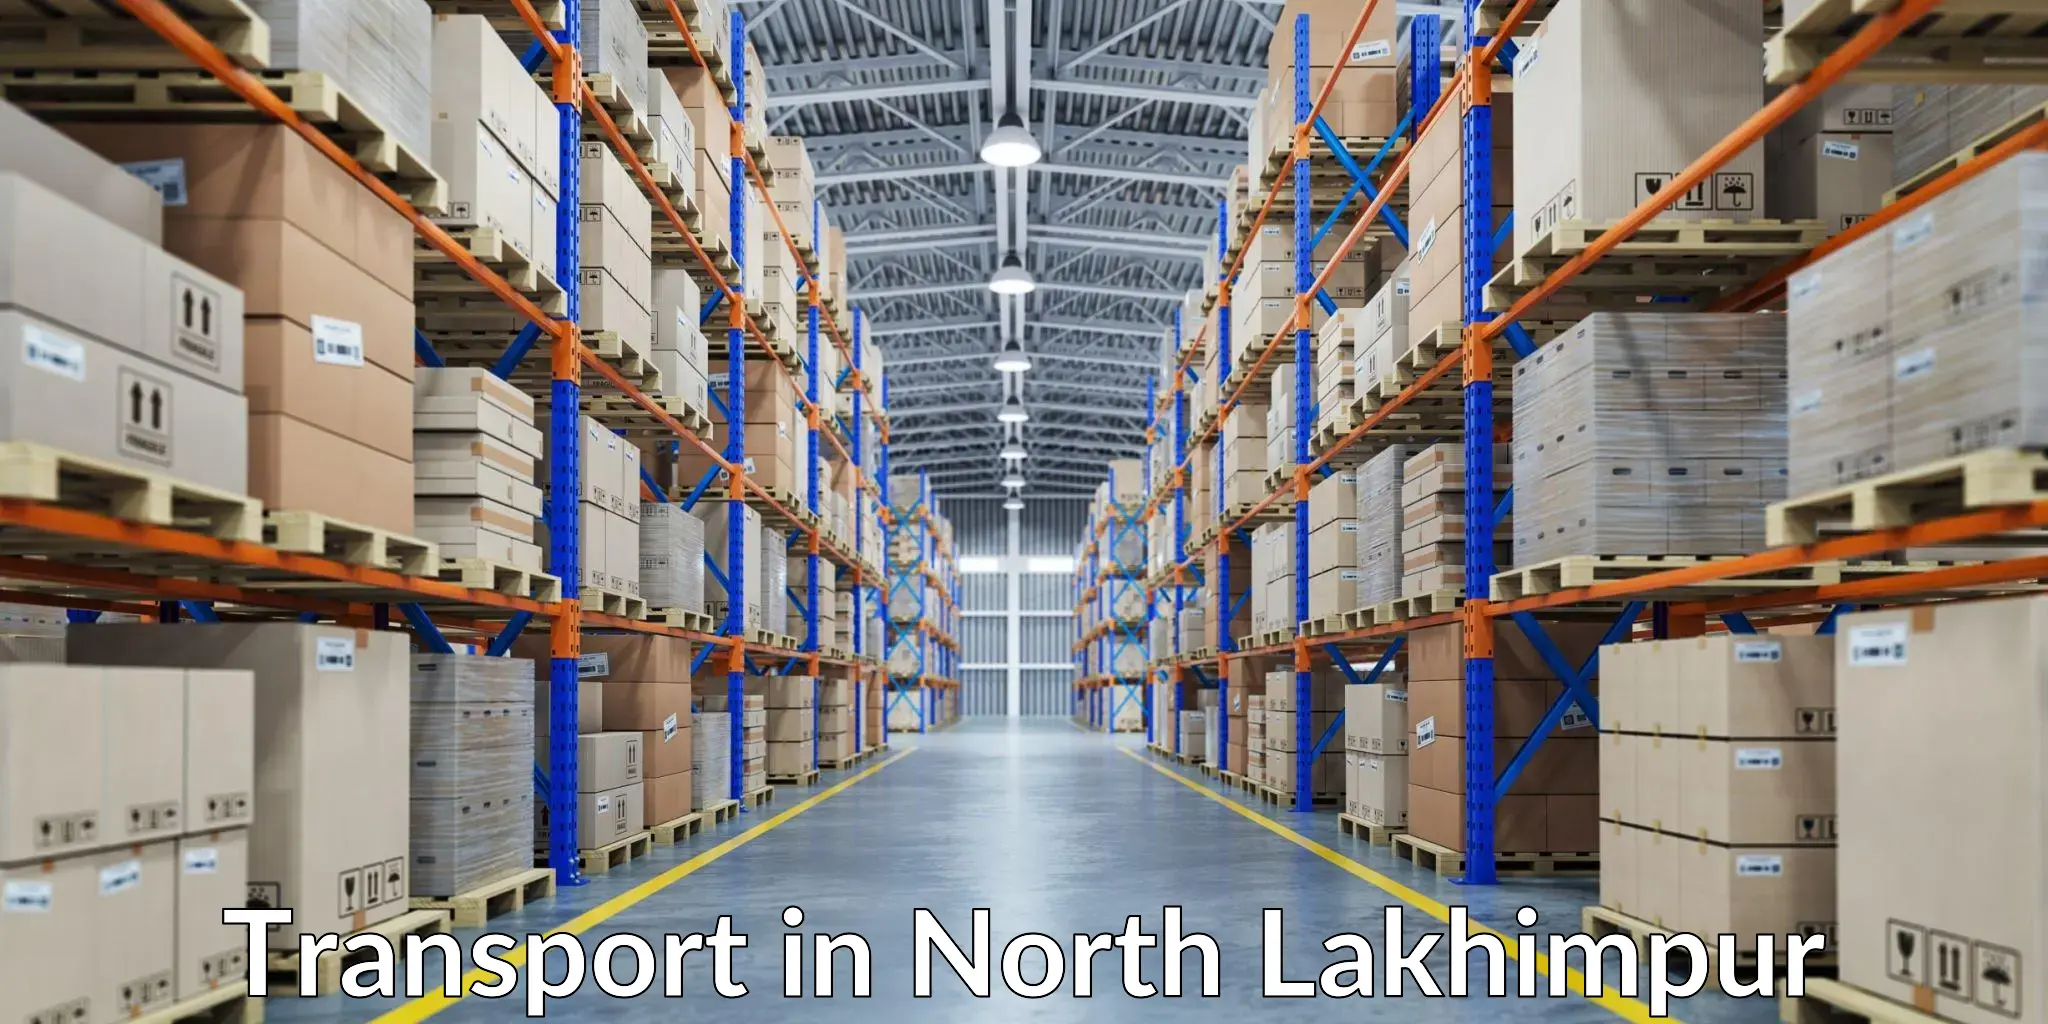 Air freight transport services in North Lakhimpur